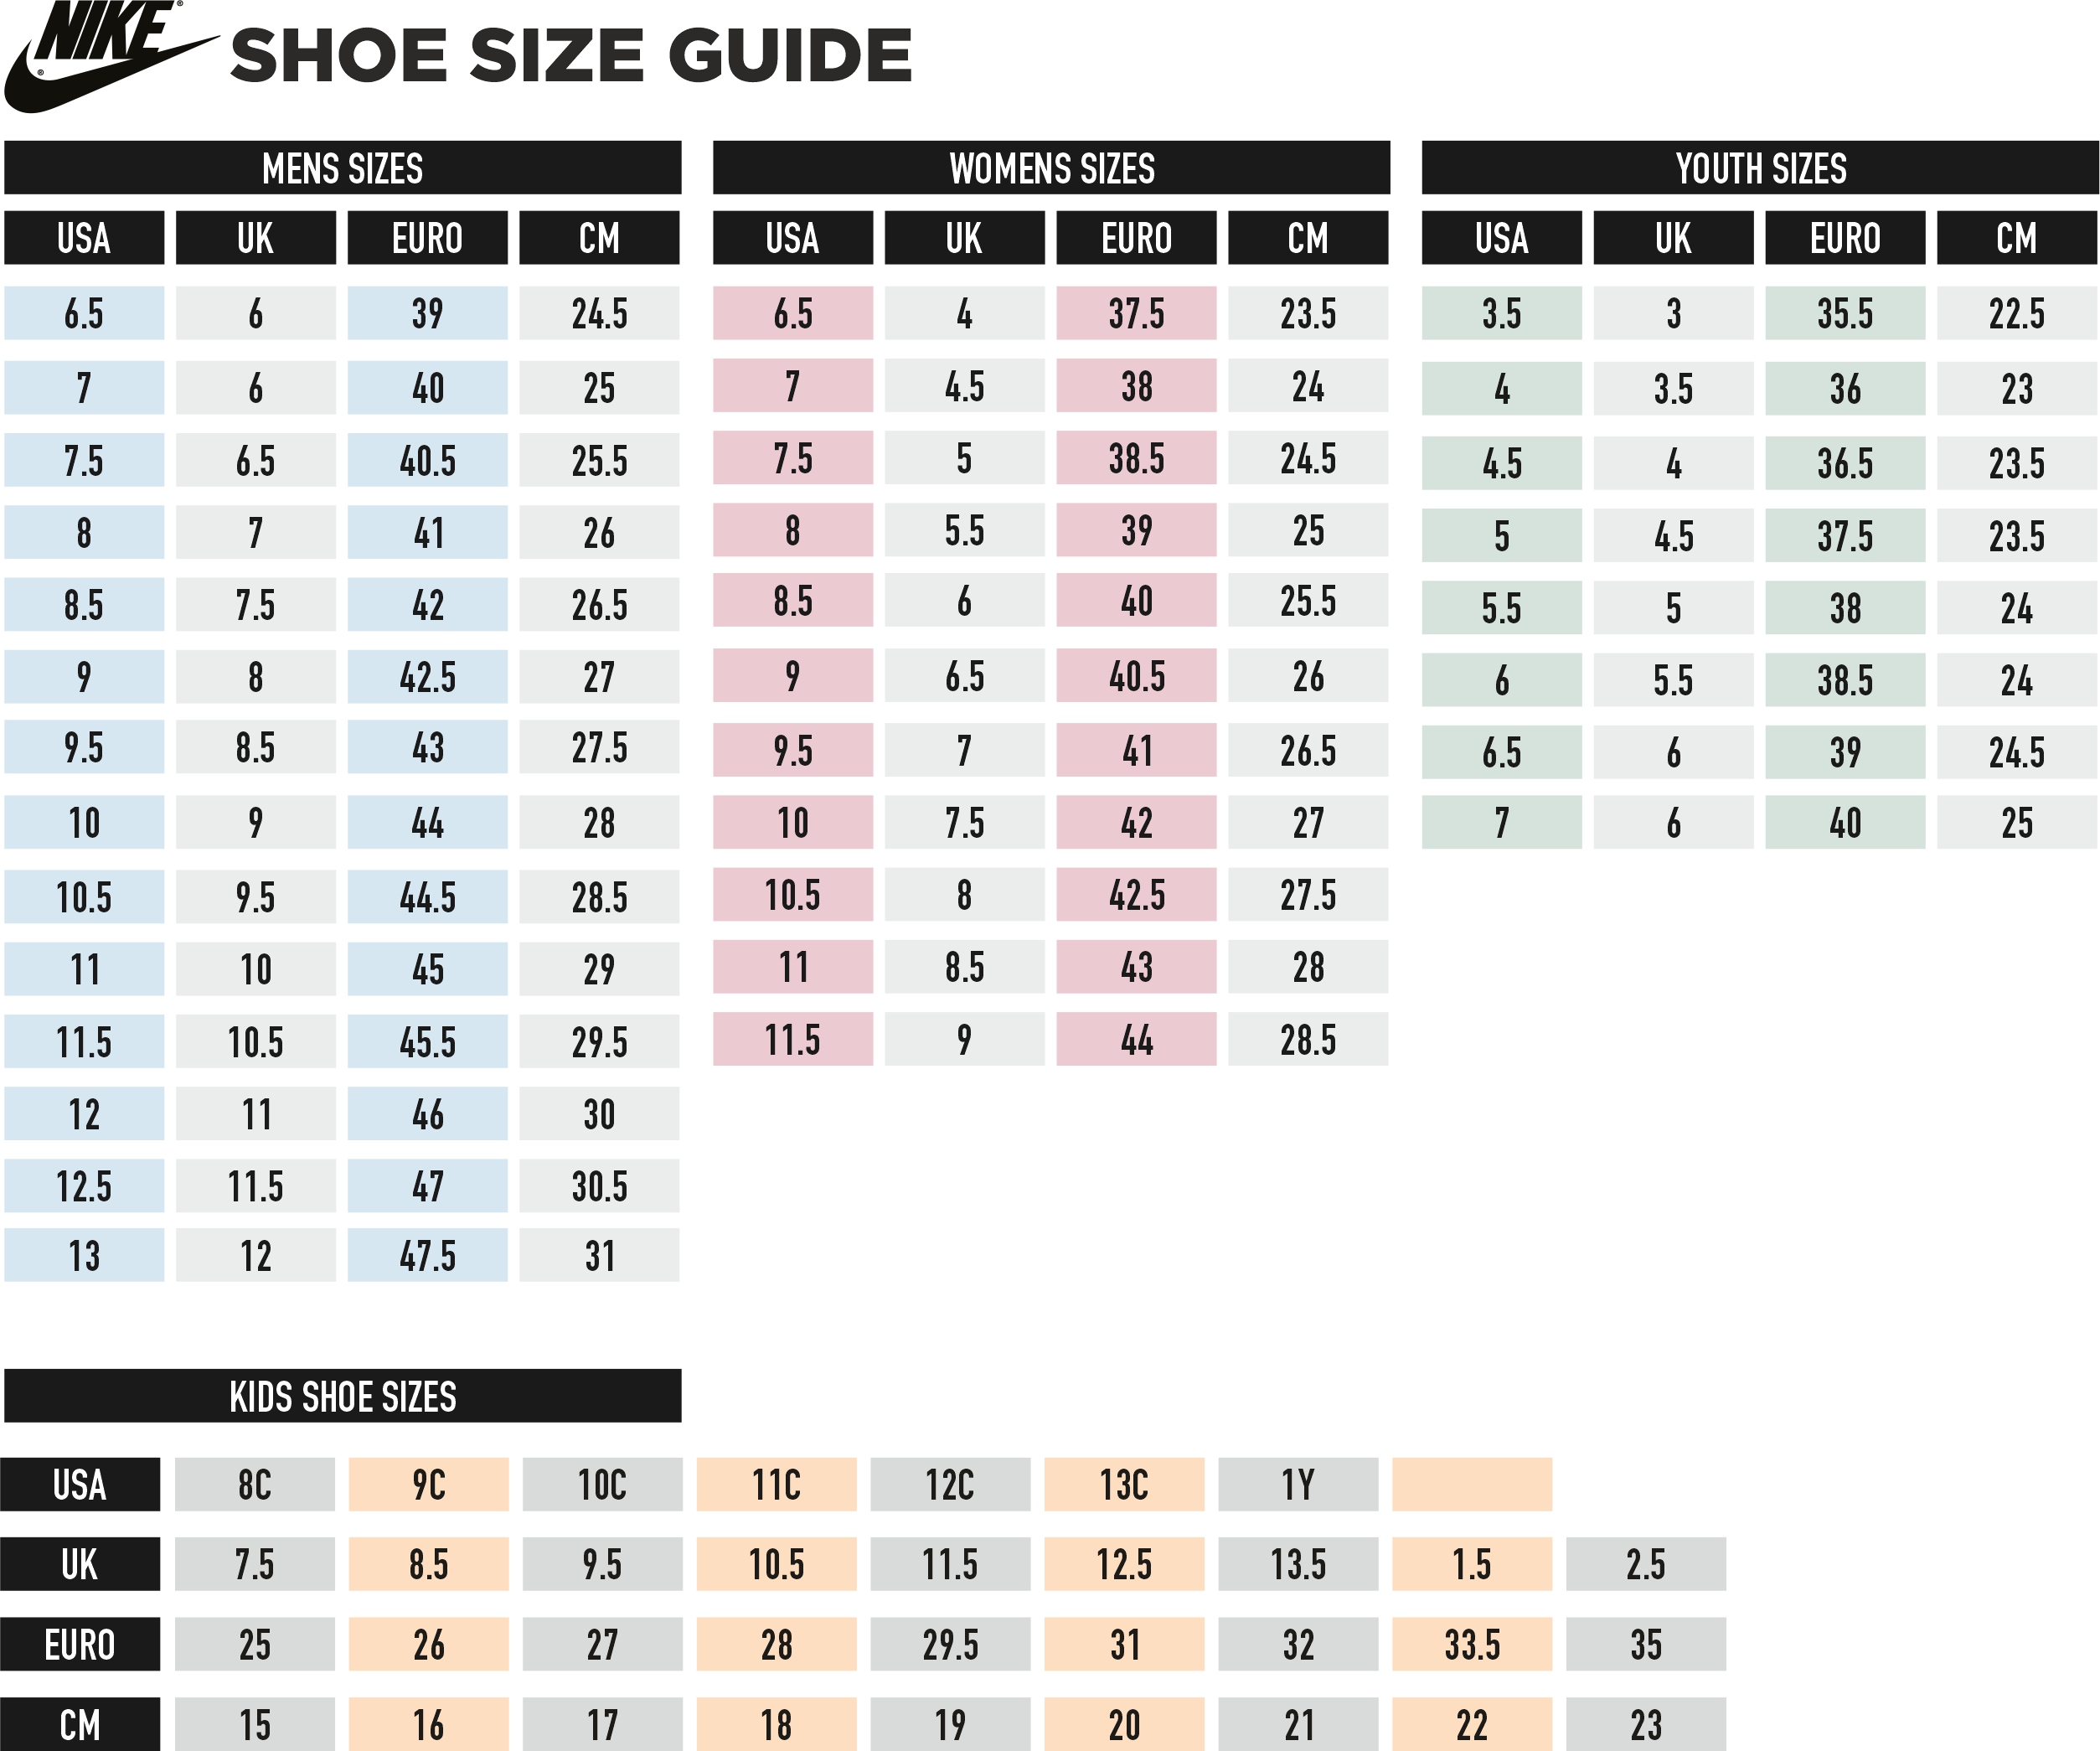 Shoe Size Guides at Intersport Elverys